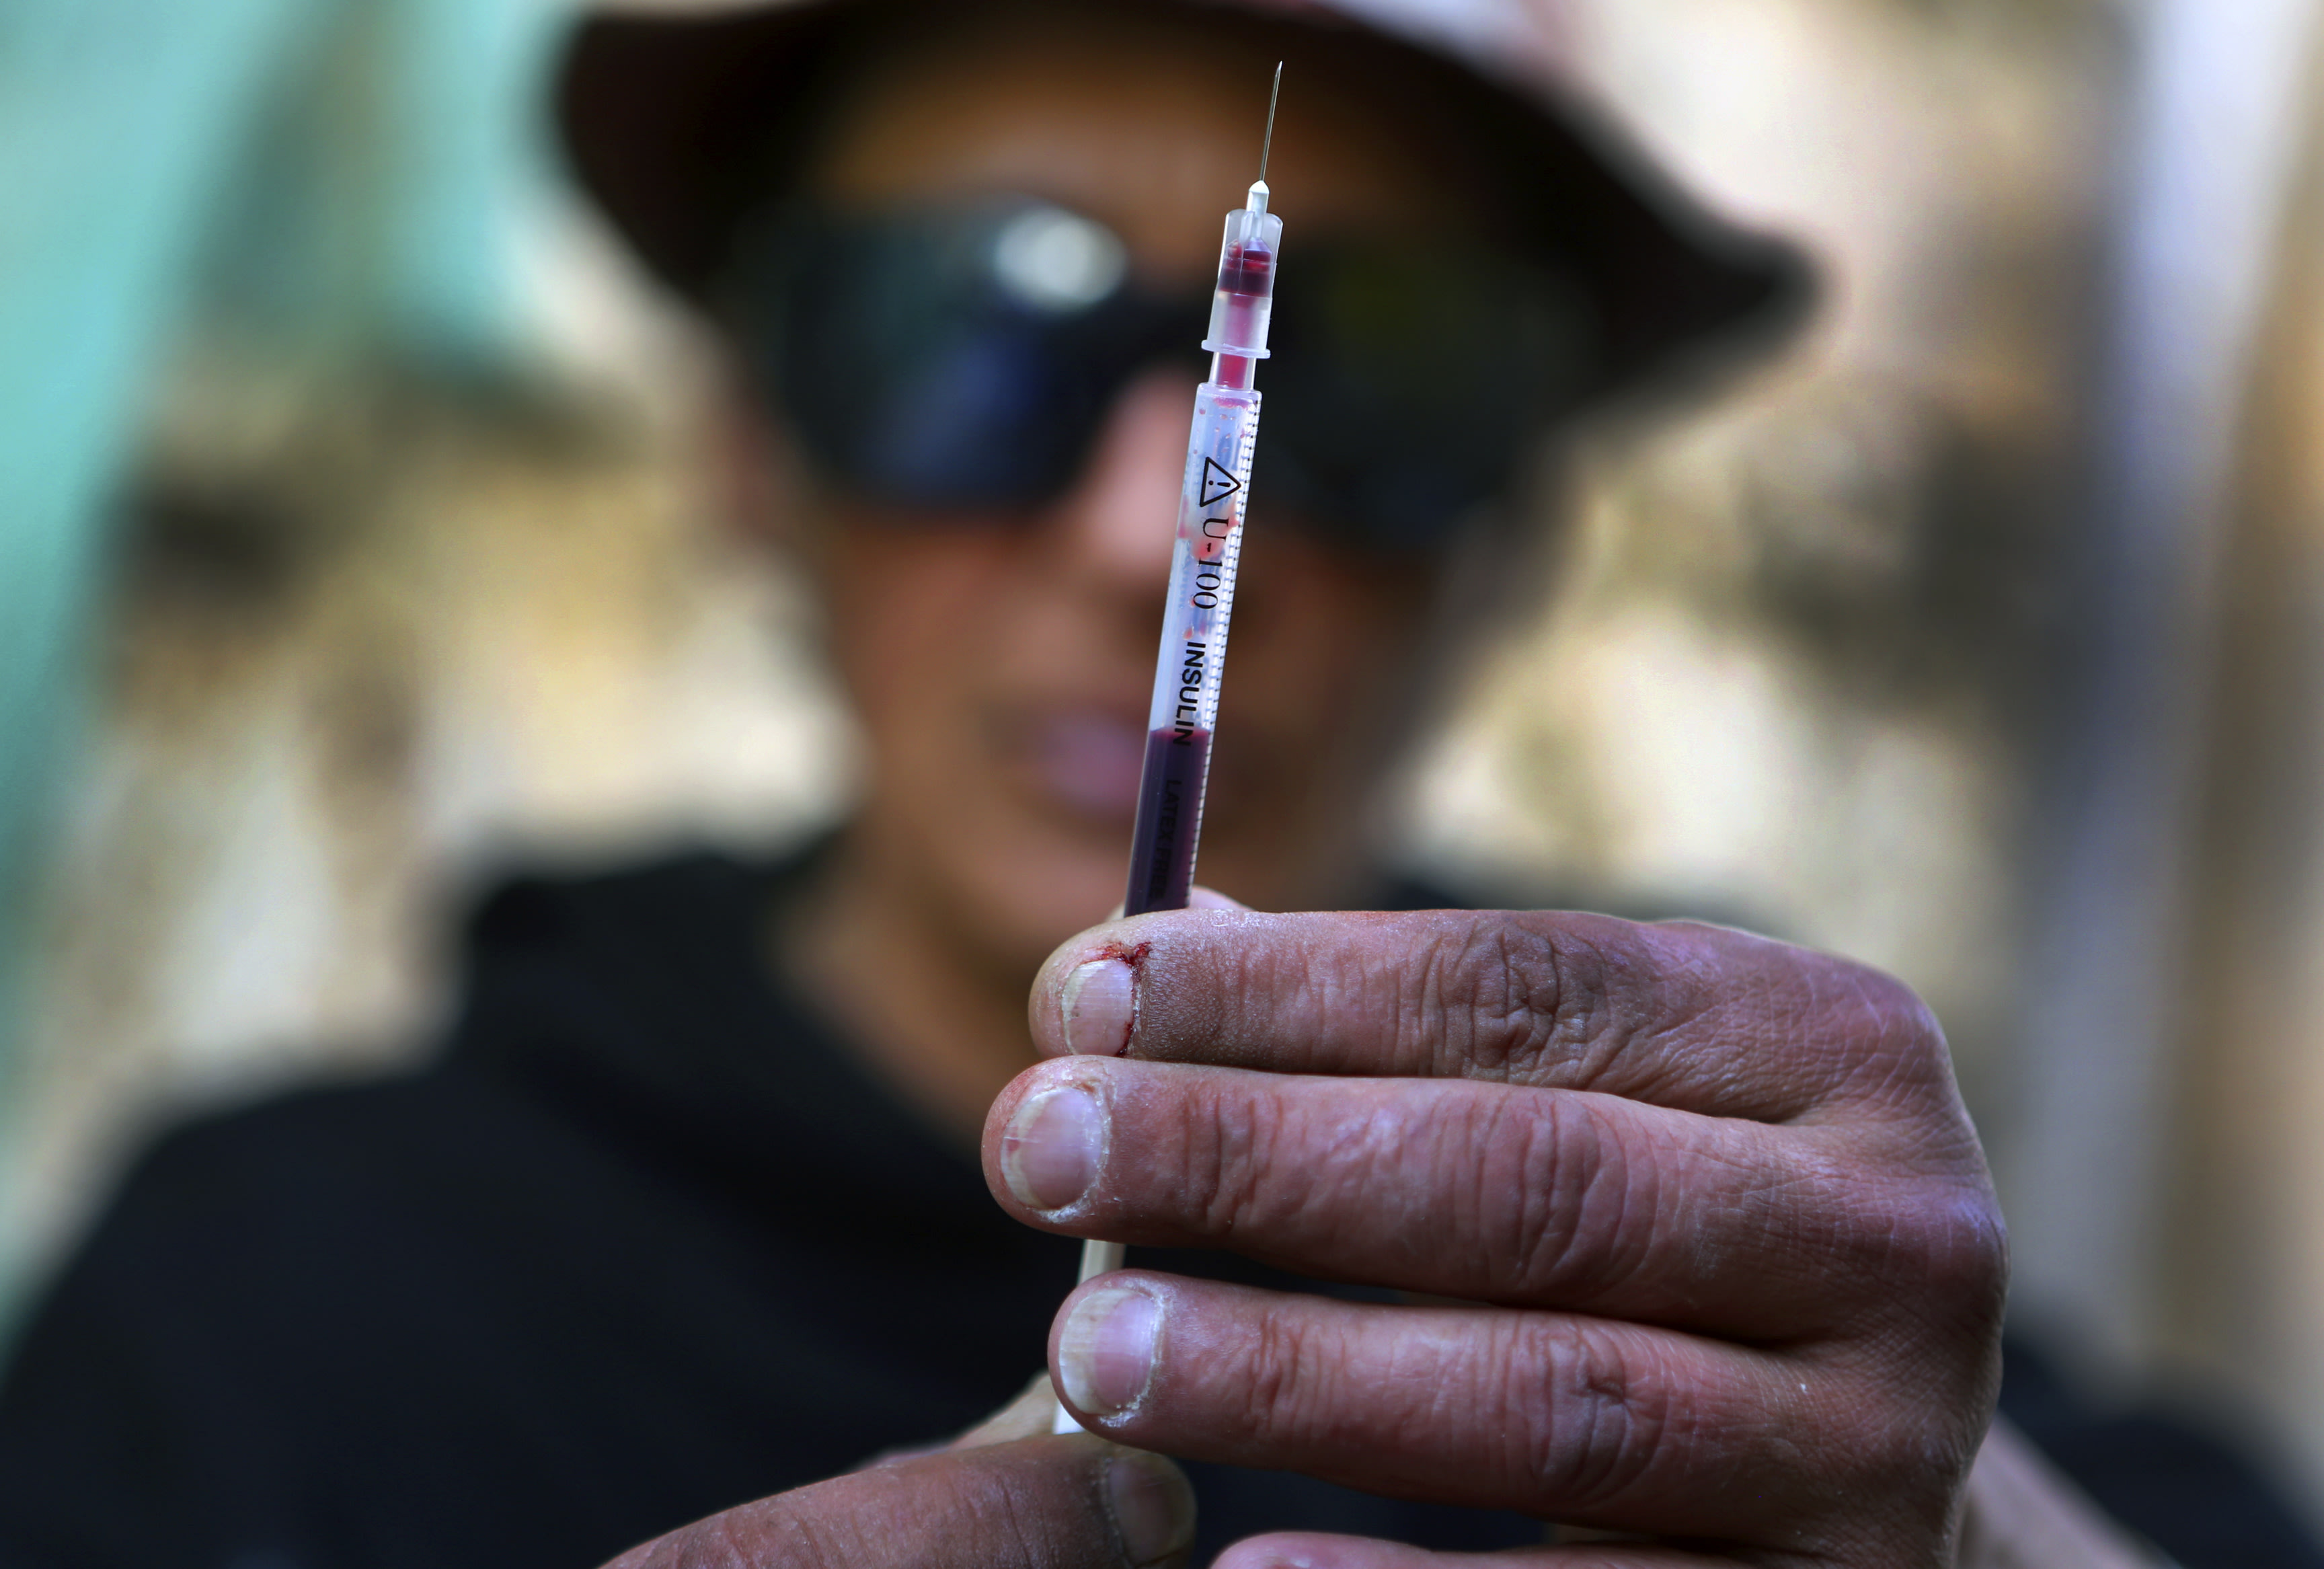 Heroin users are cutting their heroin with a deadly chemical in hopes of bringing themselves 'as close to the line as possible'